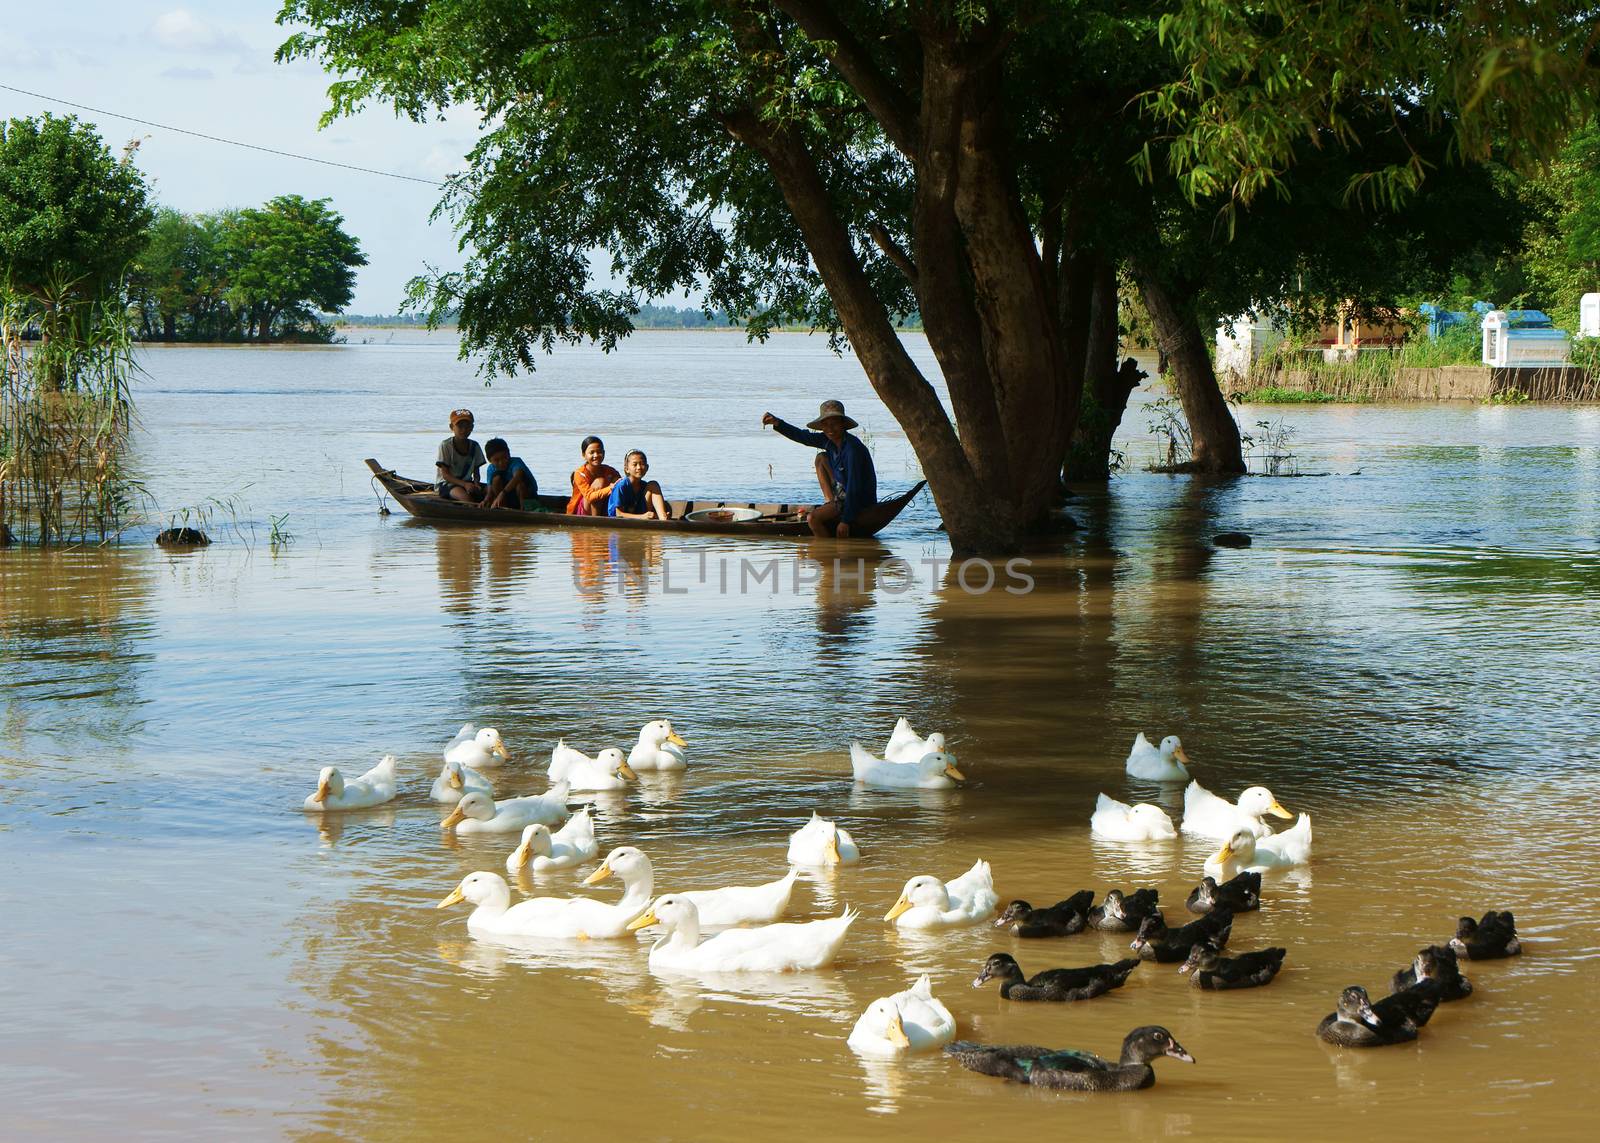  MEKONG DELTA, VIET NAM- SEPT 19: Group of child sitting on row boat, man rowing on river, flock of duck, tree in flood season, beautiful landscape of Vietnamese countryside, Vietnam, Sept 19, 2014 